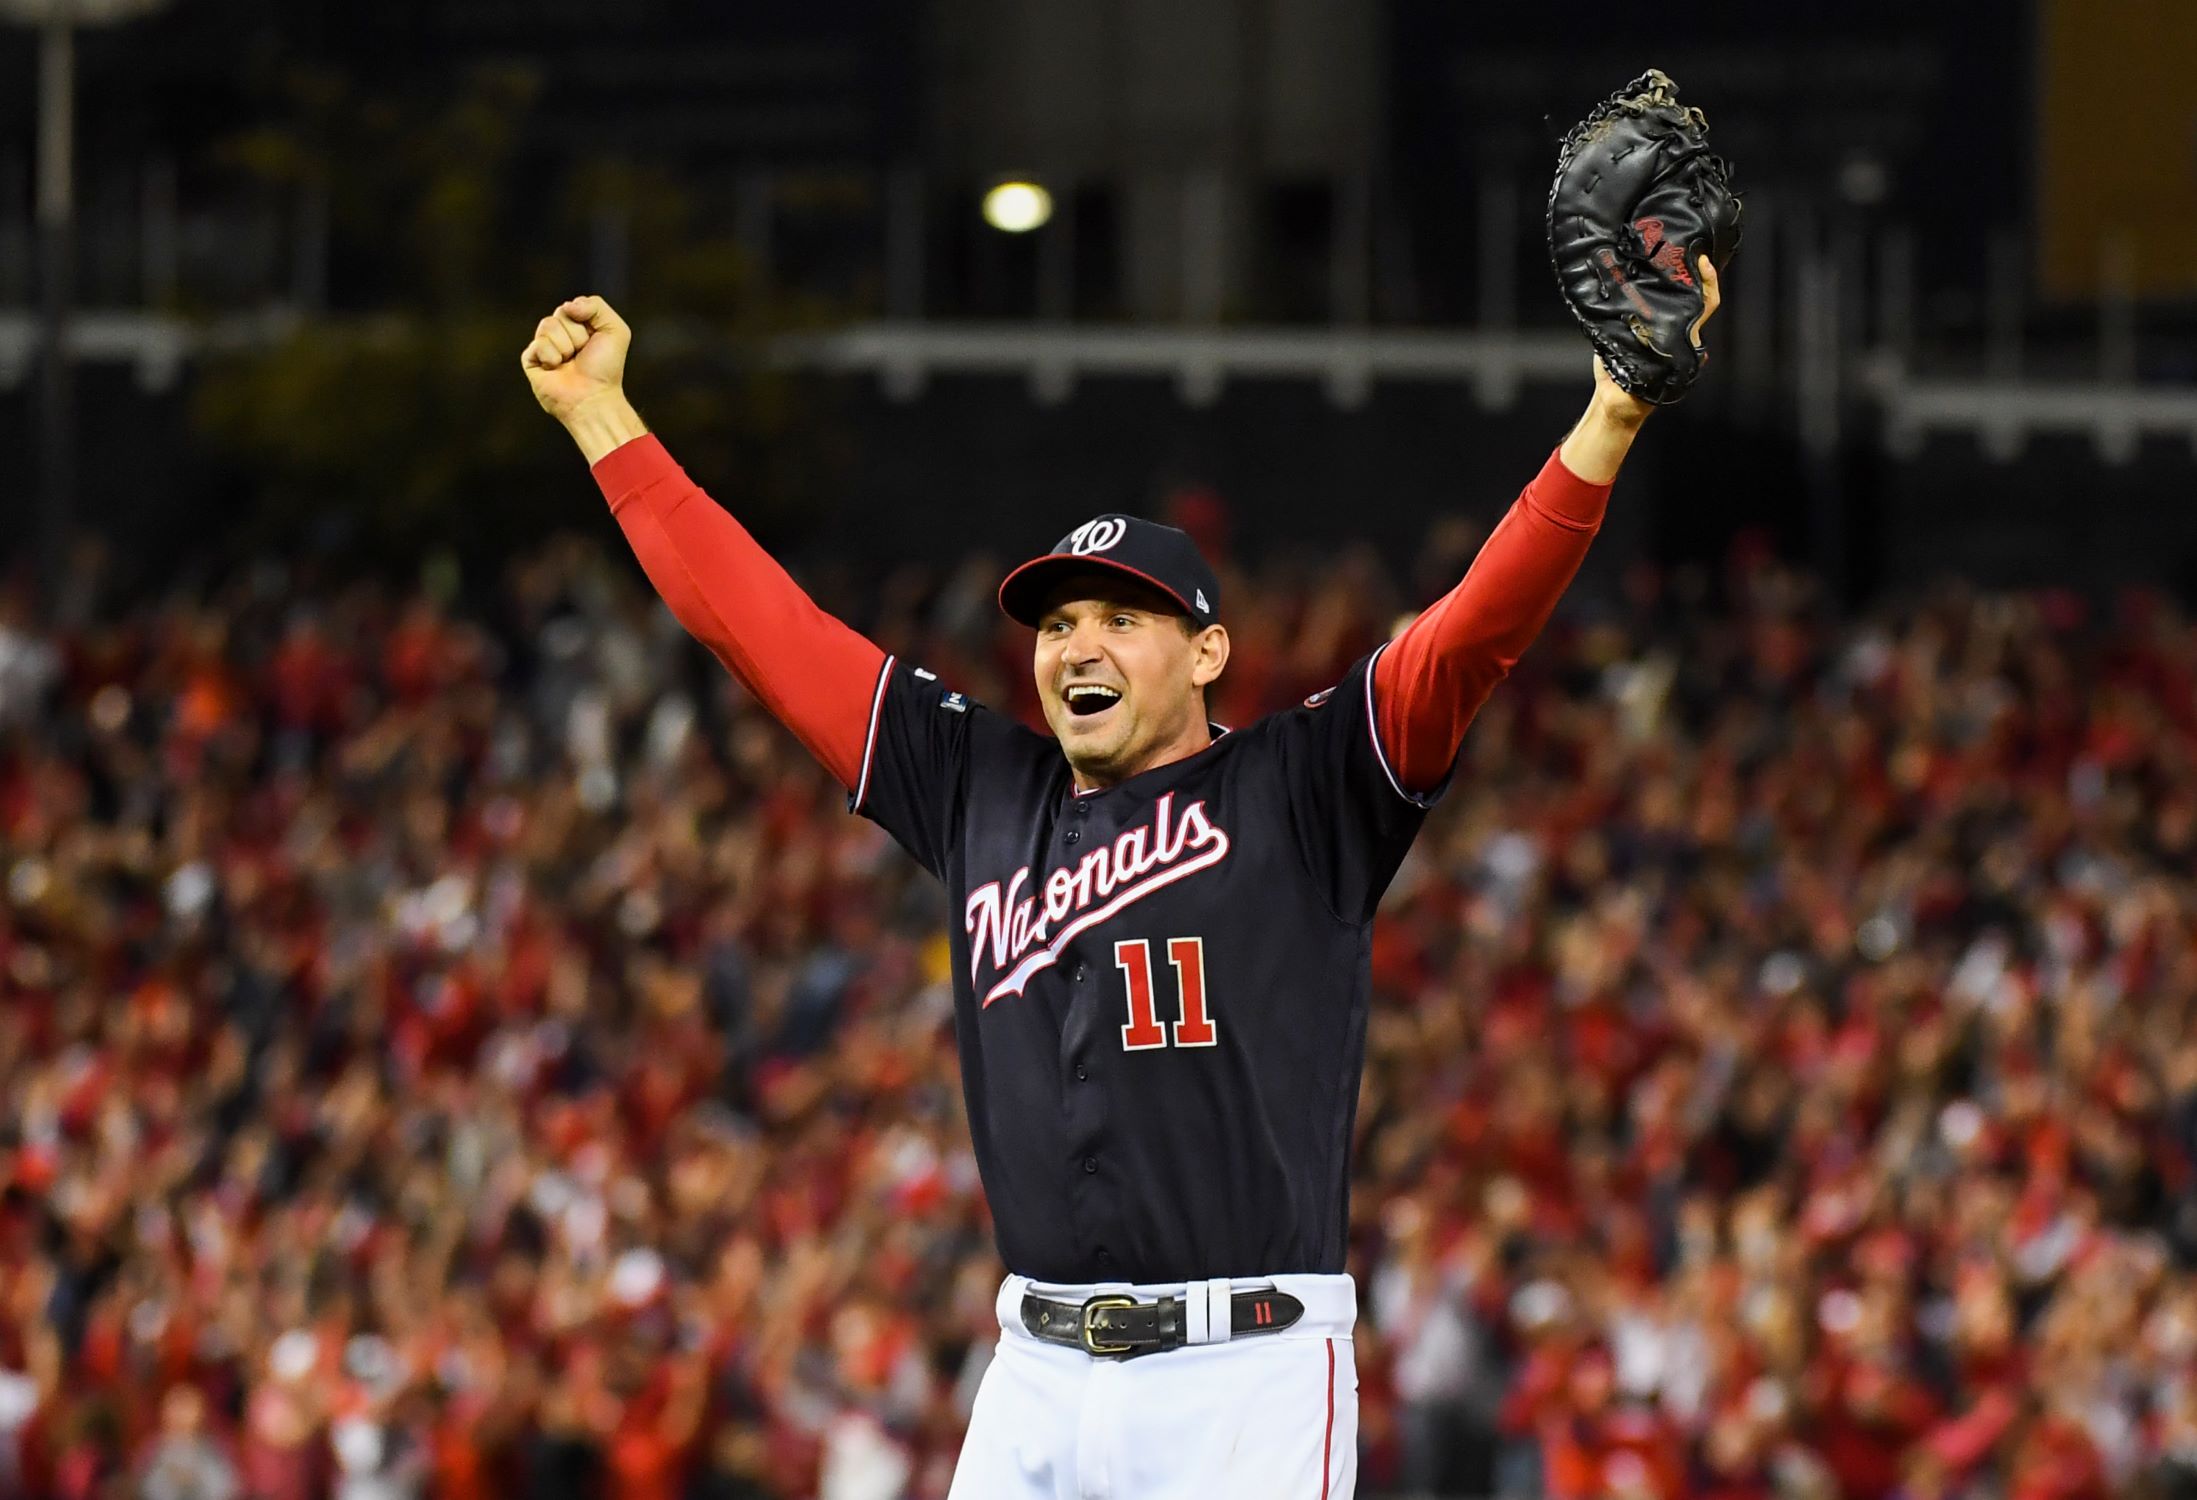 20-fascinating-facts-about-ryan-zimmerman